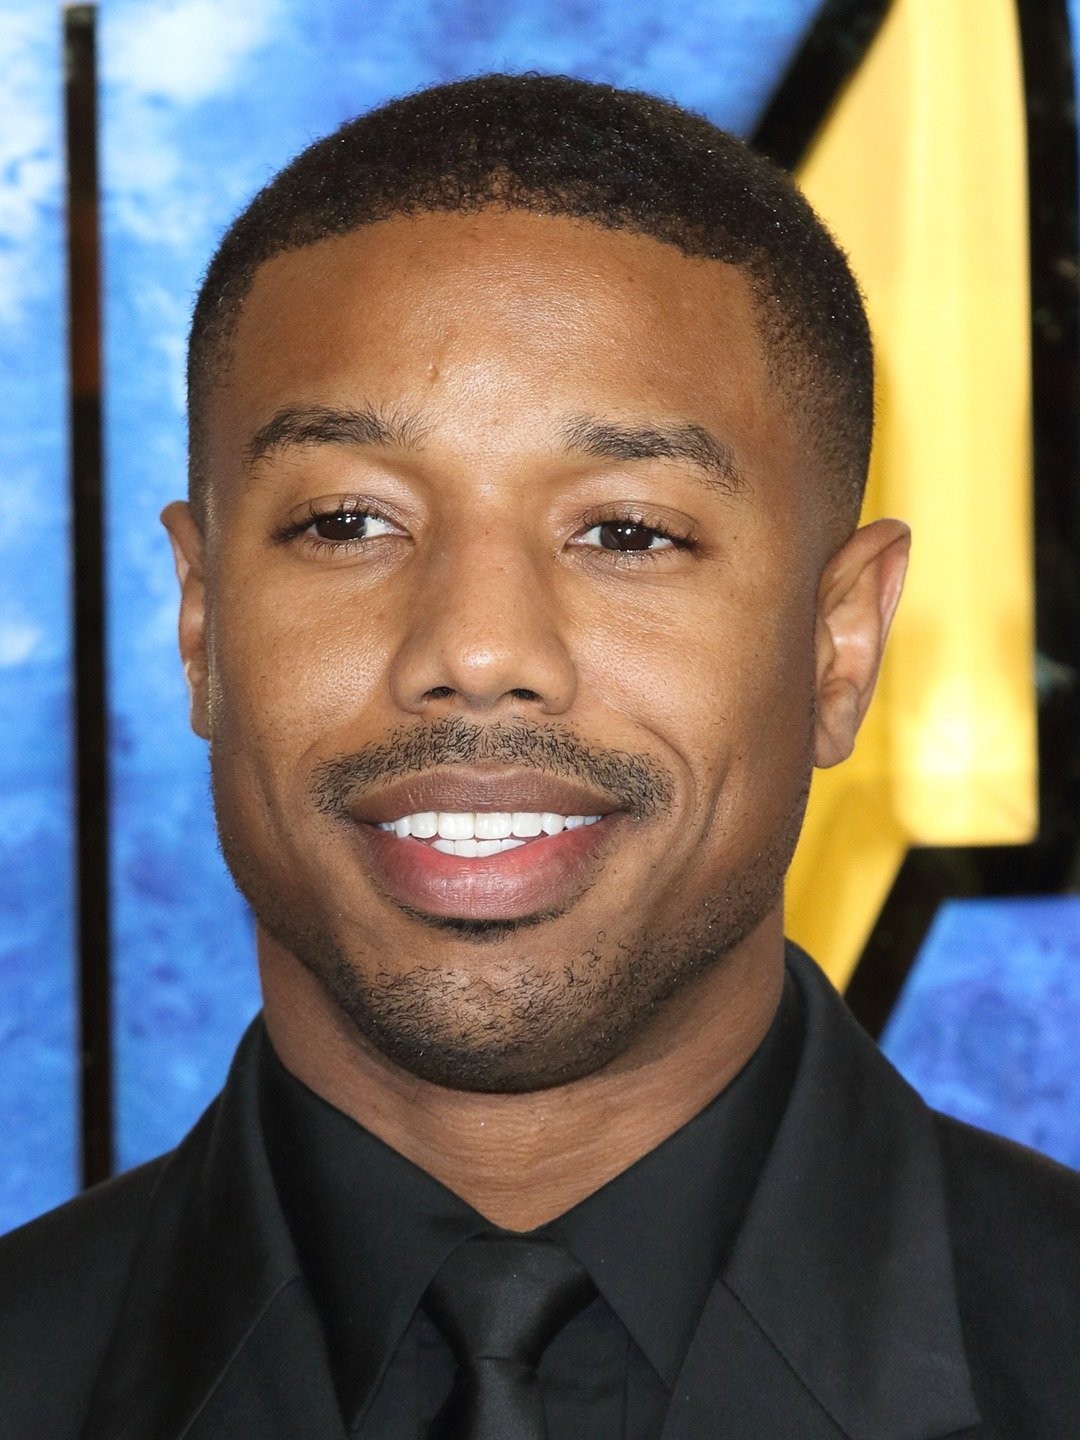 Wallace Death The Wire - Michael B. Jordan's Death on The Wire Was Just As  Heartbreaking in Real Life